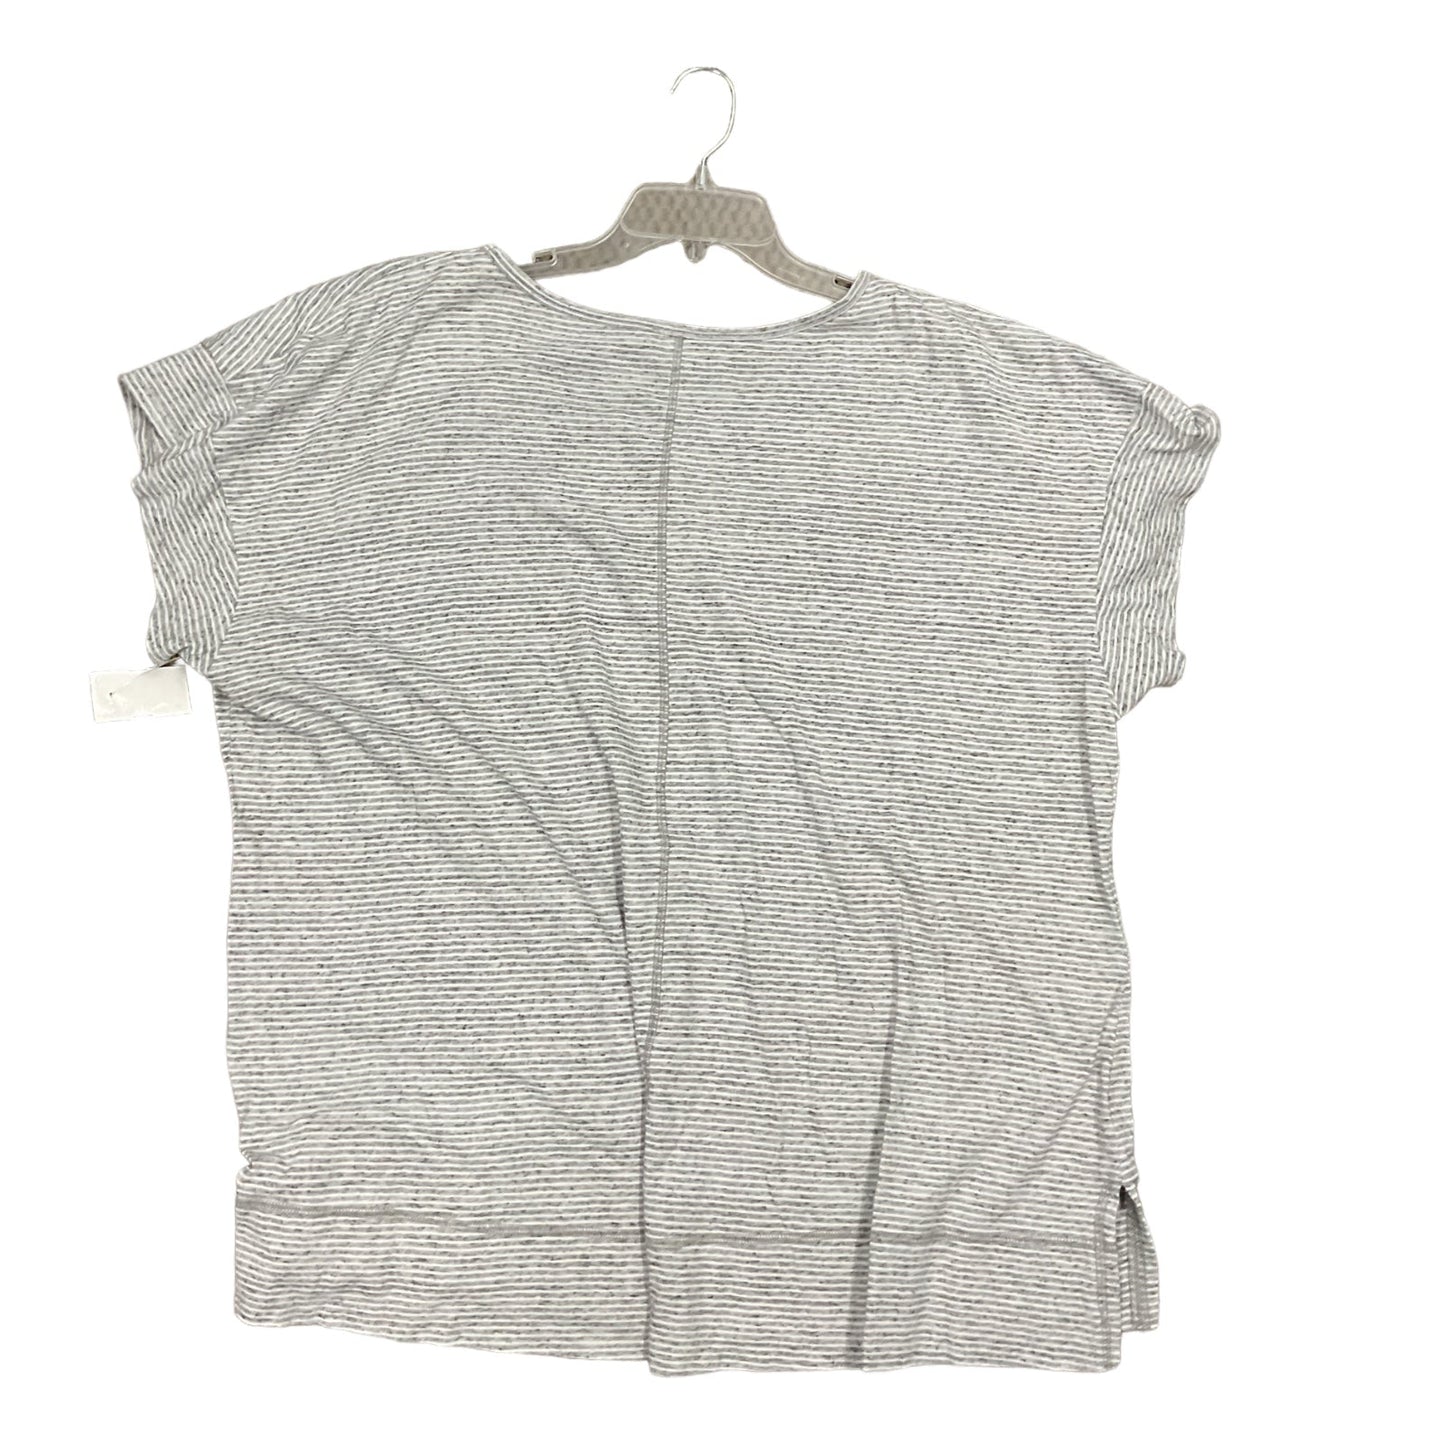 Grey Top Short Sleeve Sejour, Size 2x